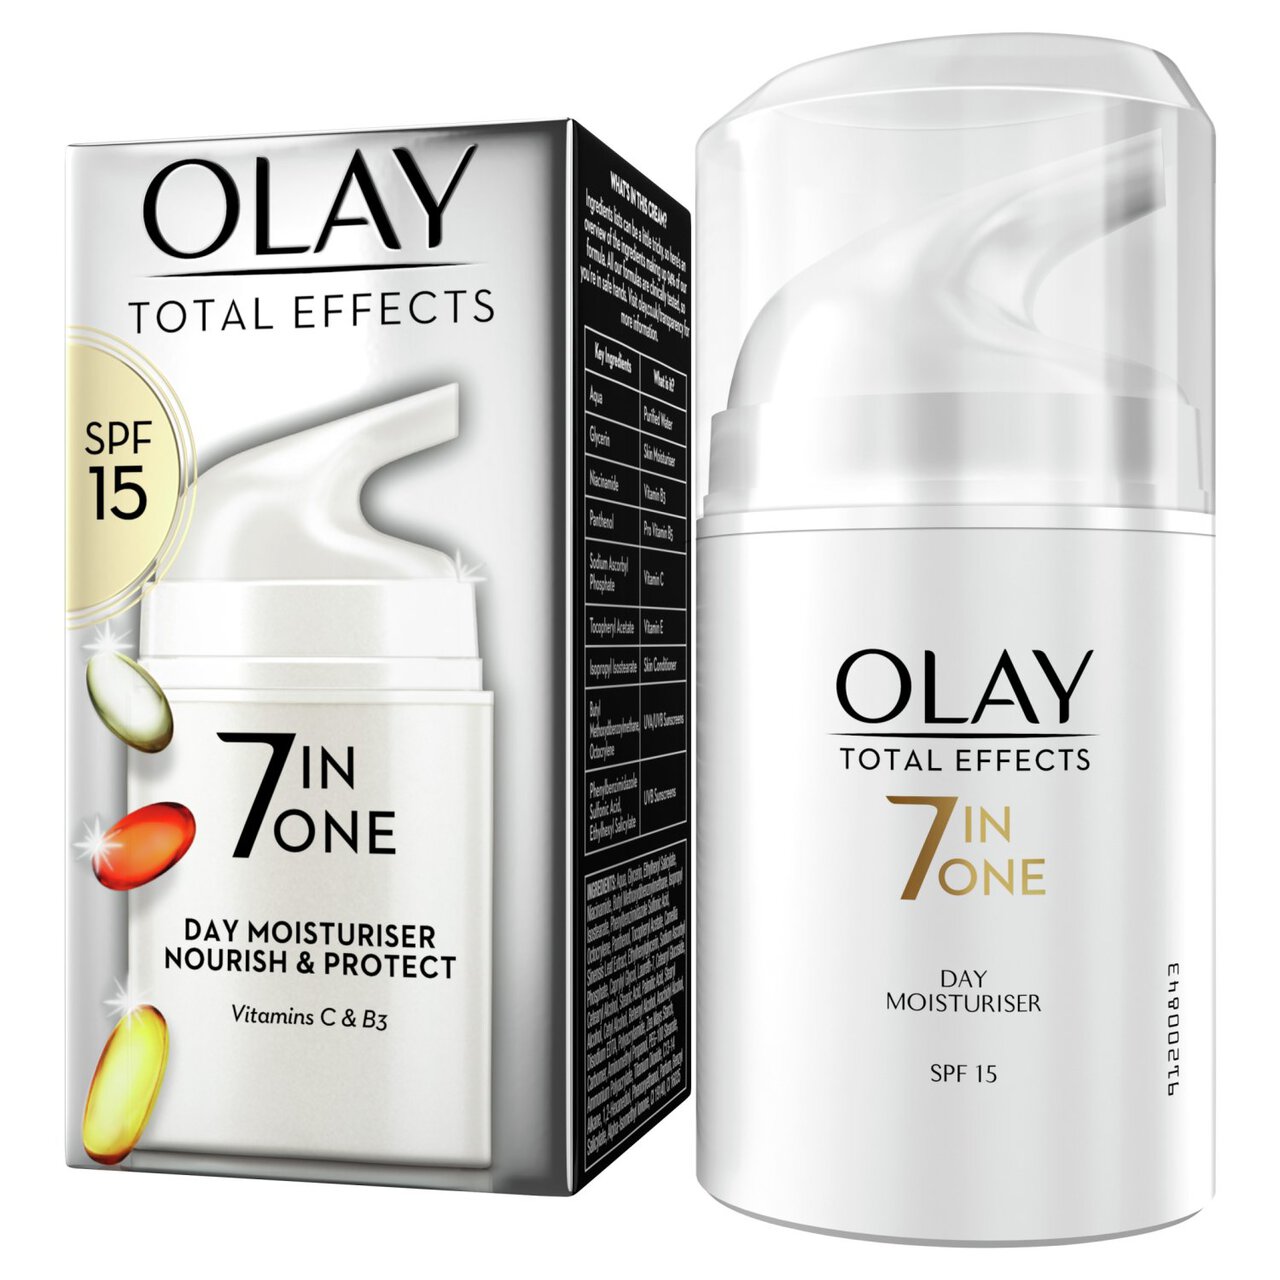 Olay Total Effects Day Cream SPF15 50ml